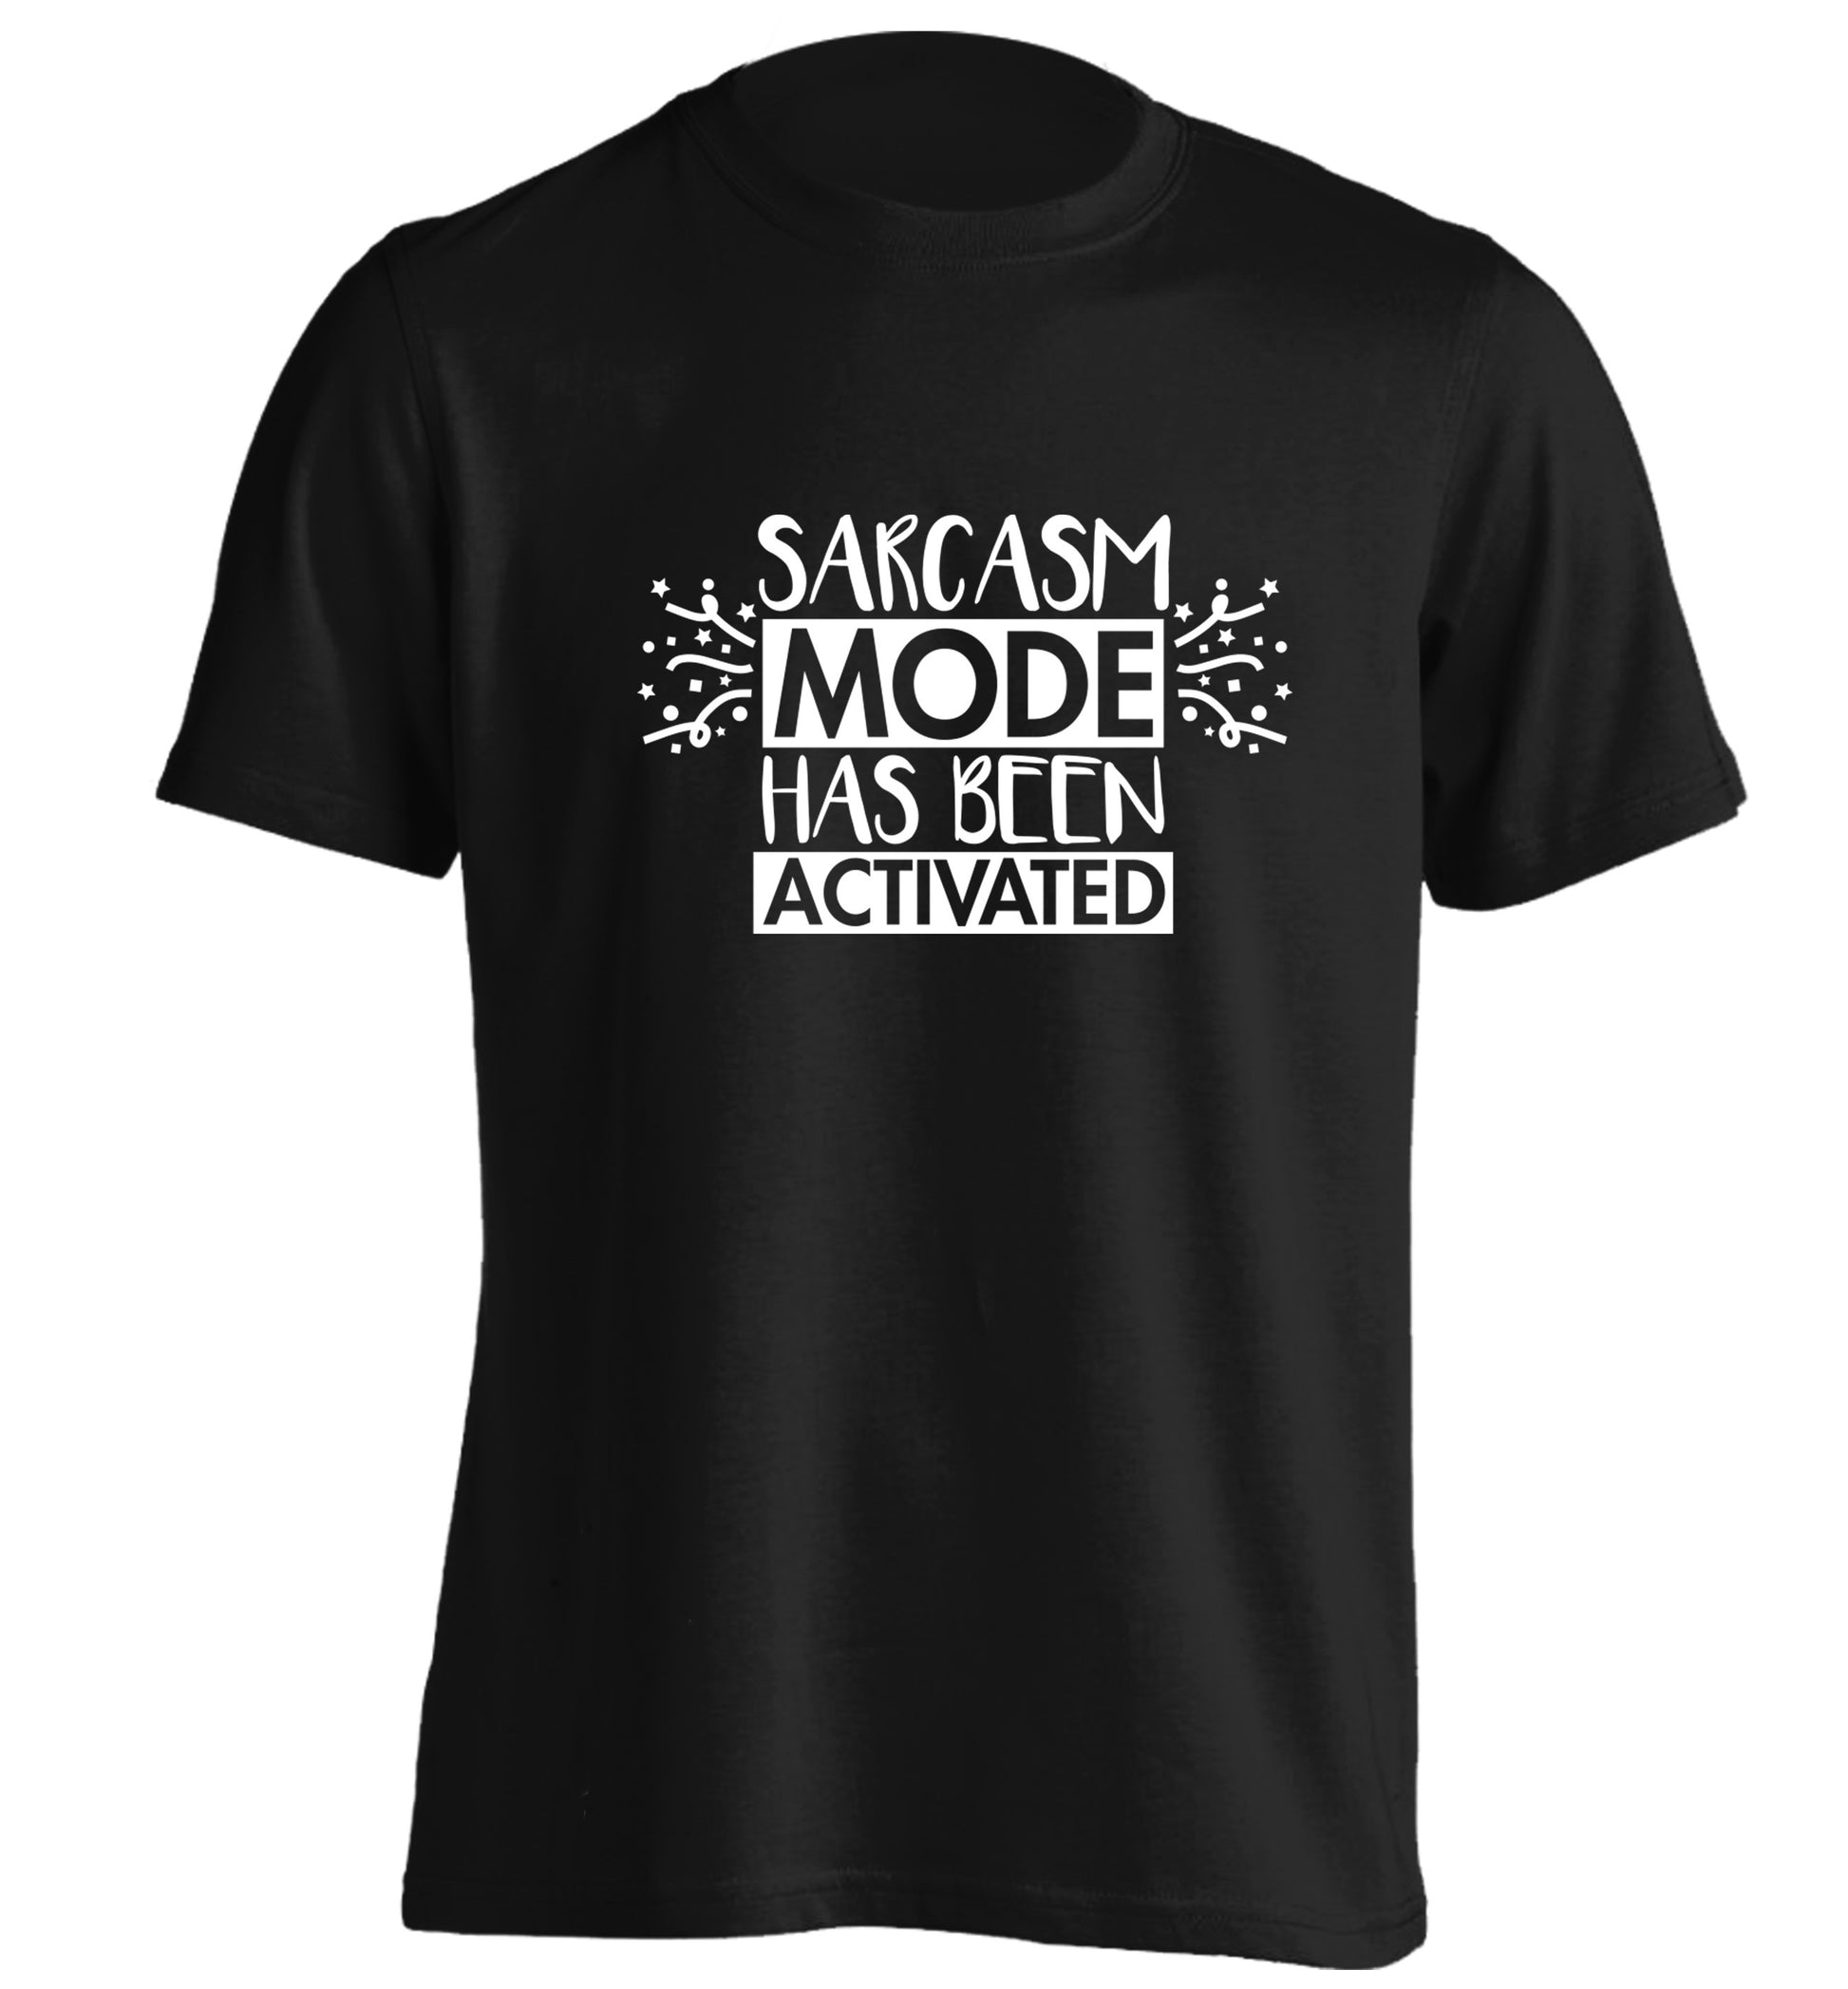 Sarcarsm mode has been activated adults unisex black Tshirt 2XL